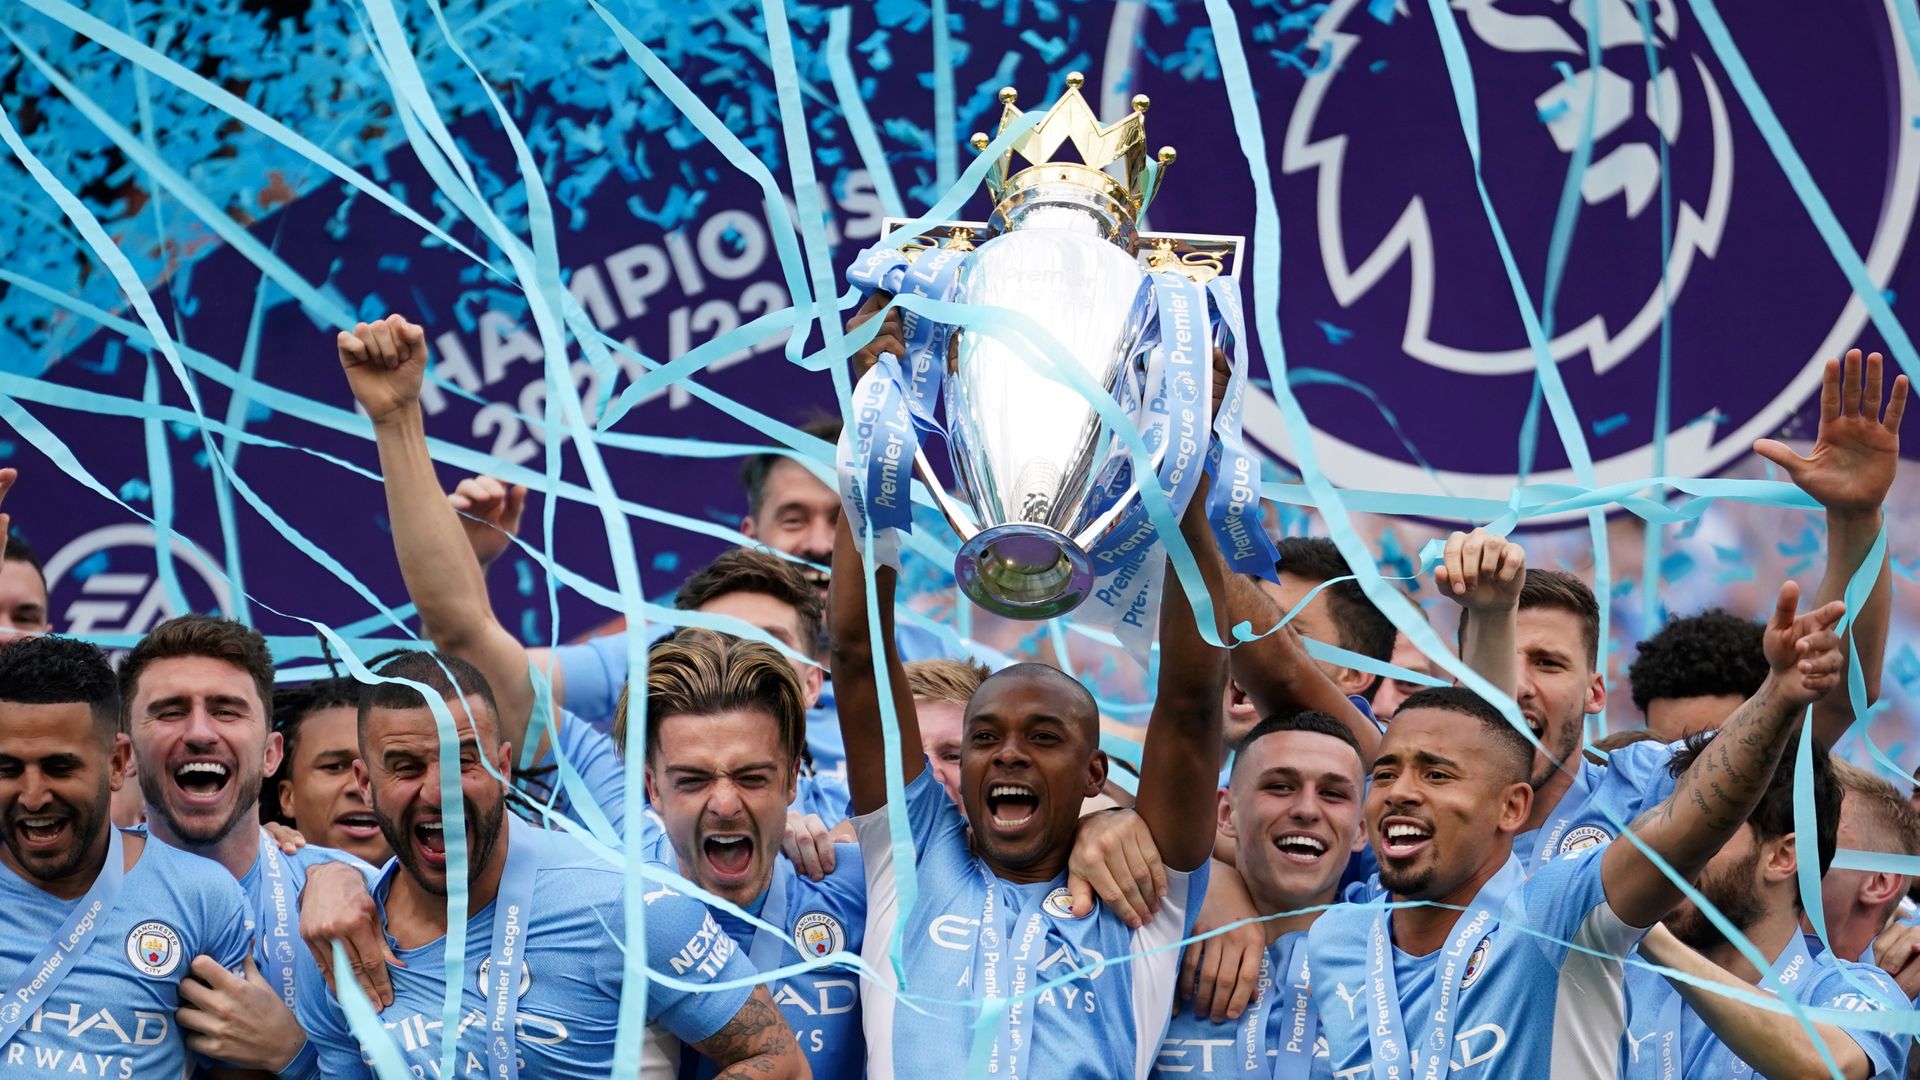 Premier League 2022/23: When Does The Season Start? What Are The Key